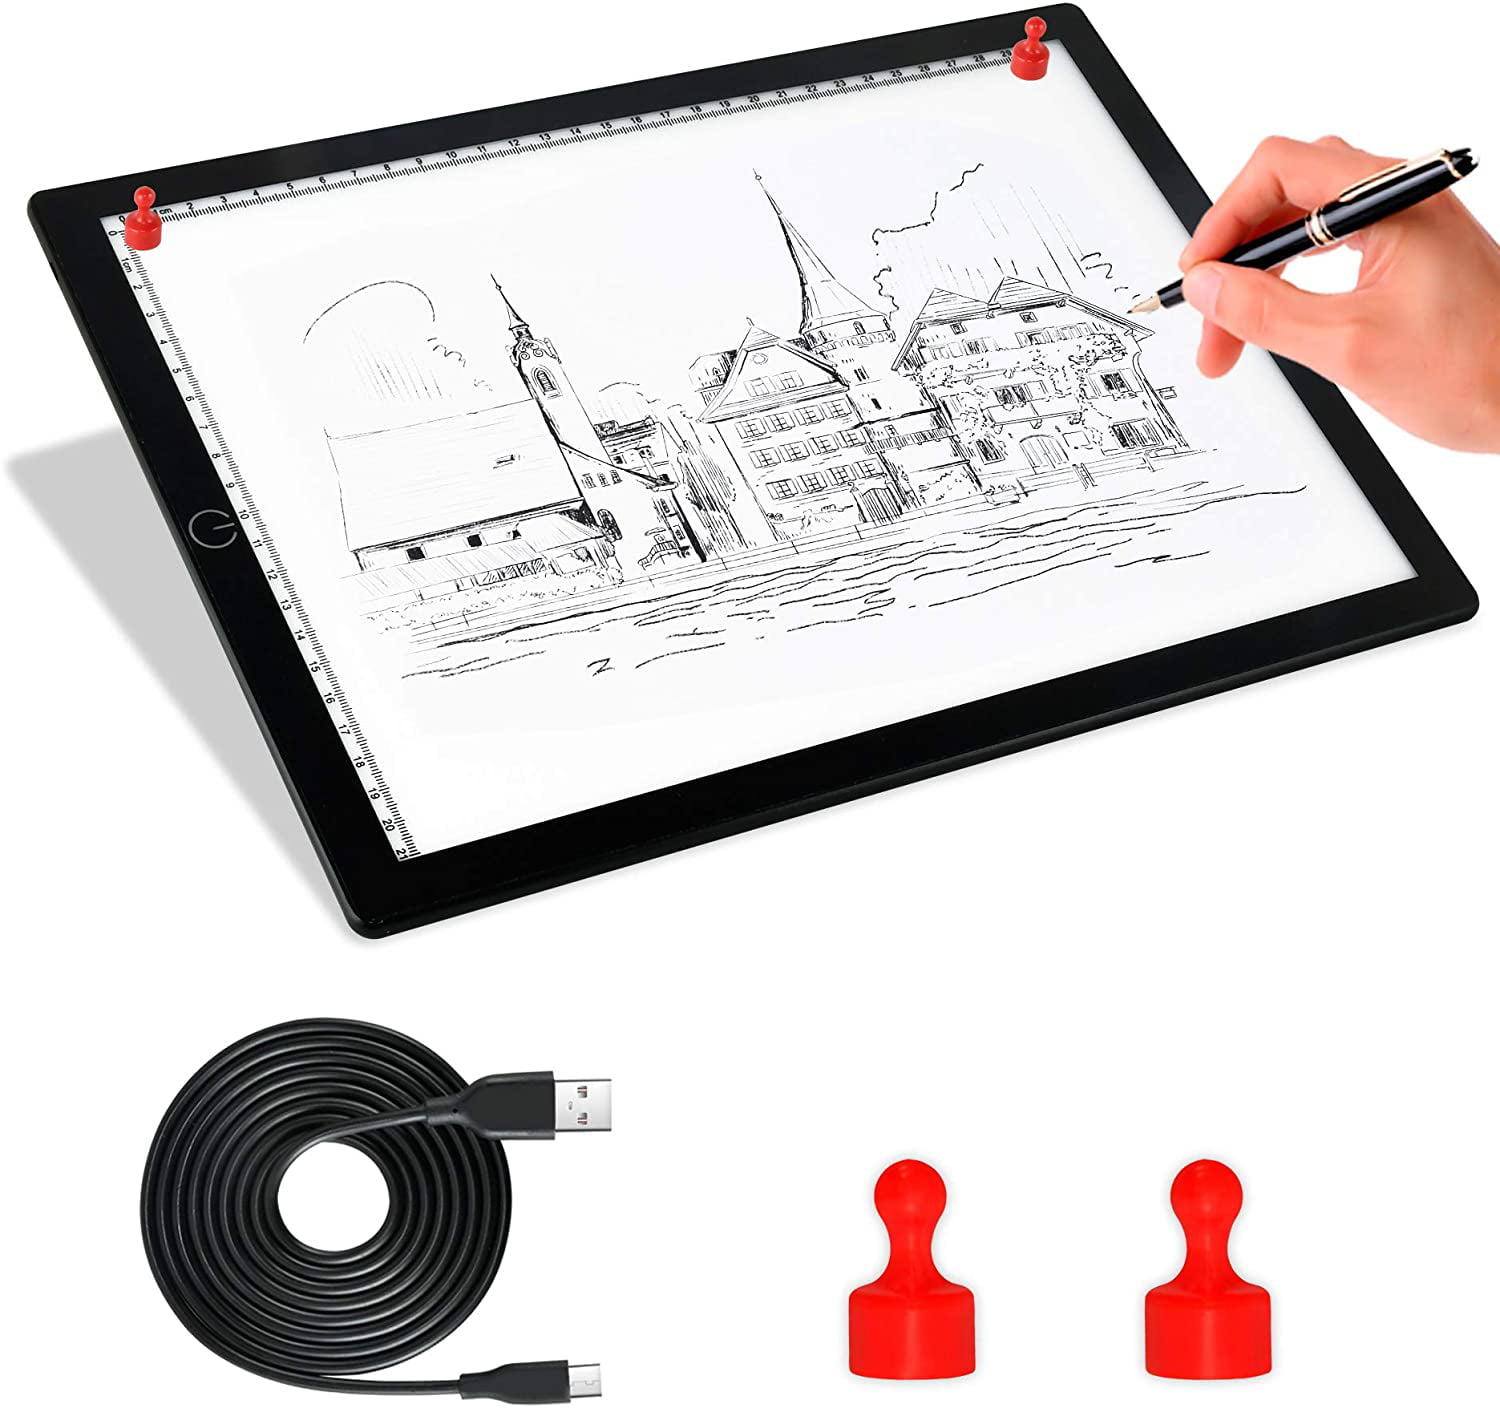 Genrc Illuminati Light Box For Drawing and Tracing  Comes With A4 Tracing  Paper  Holder Clamp  Ultra Thin LED Light Pad With HiMidLow Brightness  Control  Equipped With Filter To